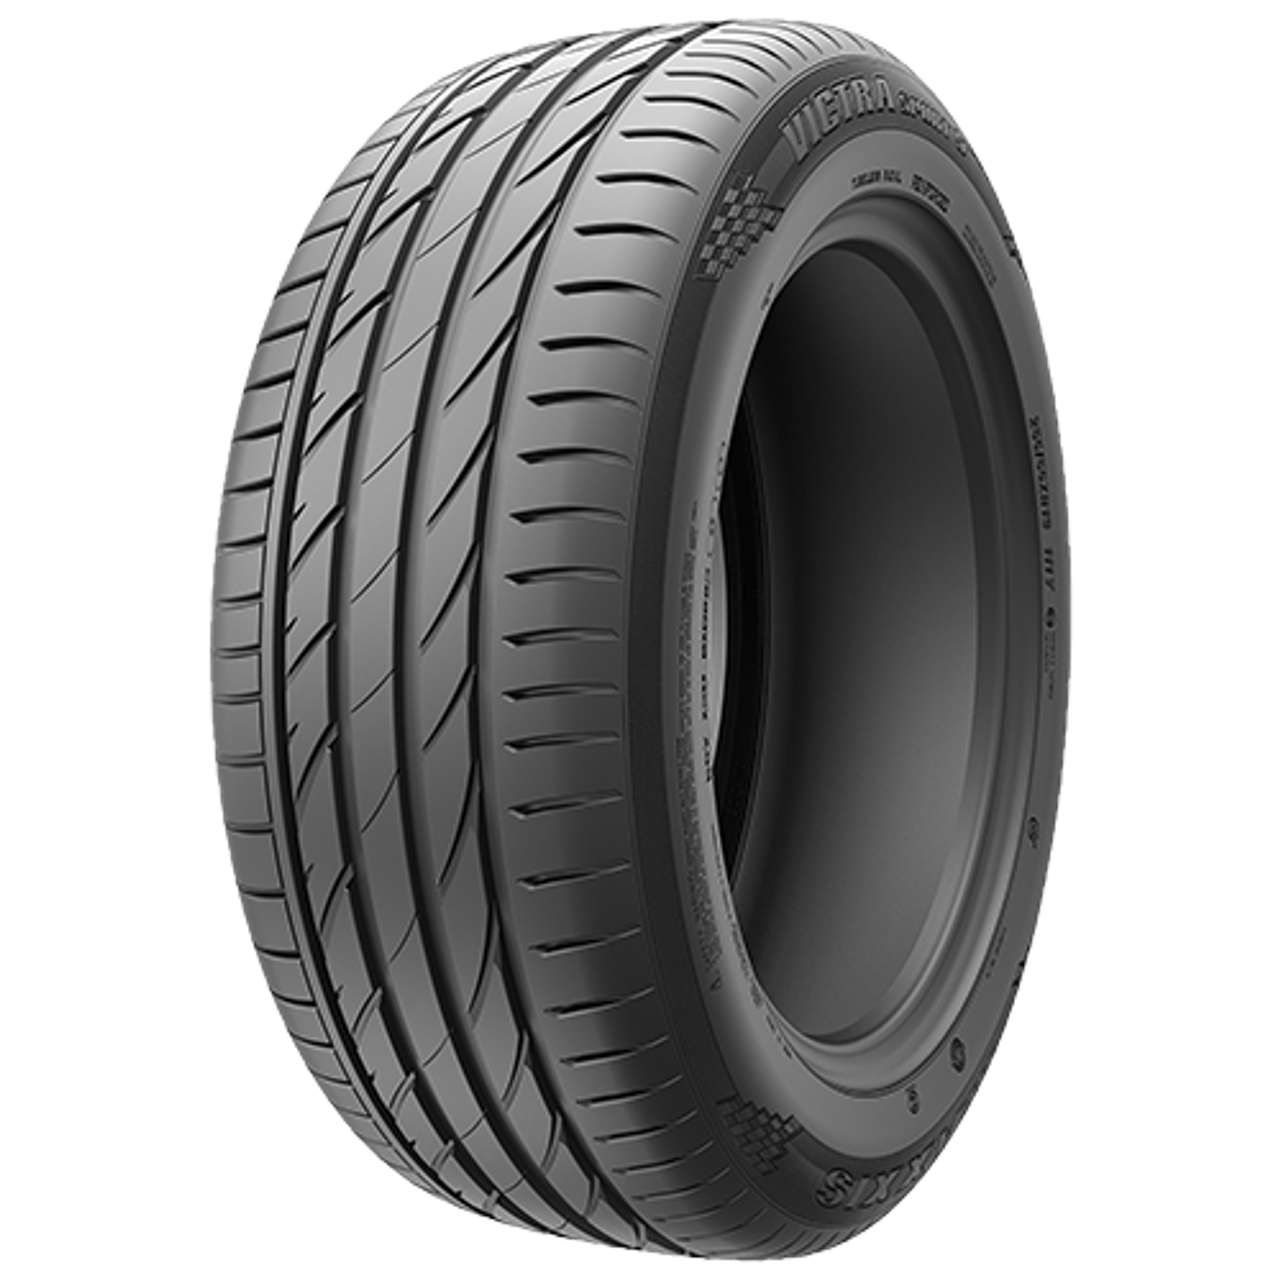 MAXXIS VICTRA SPORT 5 (VS5) SUV 275/45ZR20 110Y MFS BSW